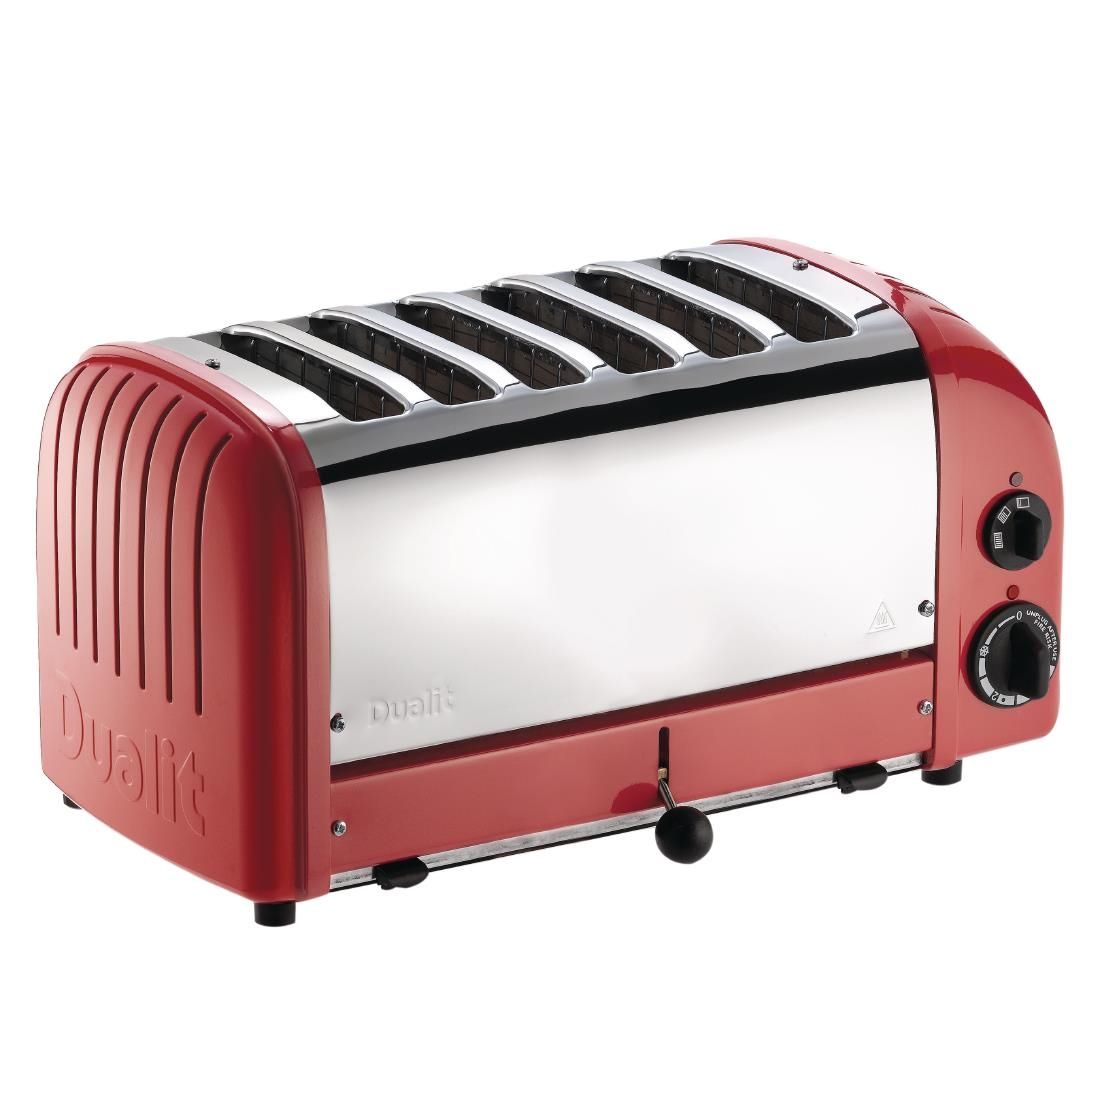 GD395 Dualit 6 Slice Vario Toaster Red 60154 JD Catering Equipment Solutions Ltd